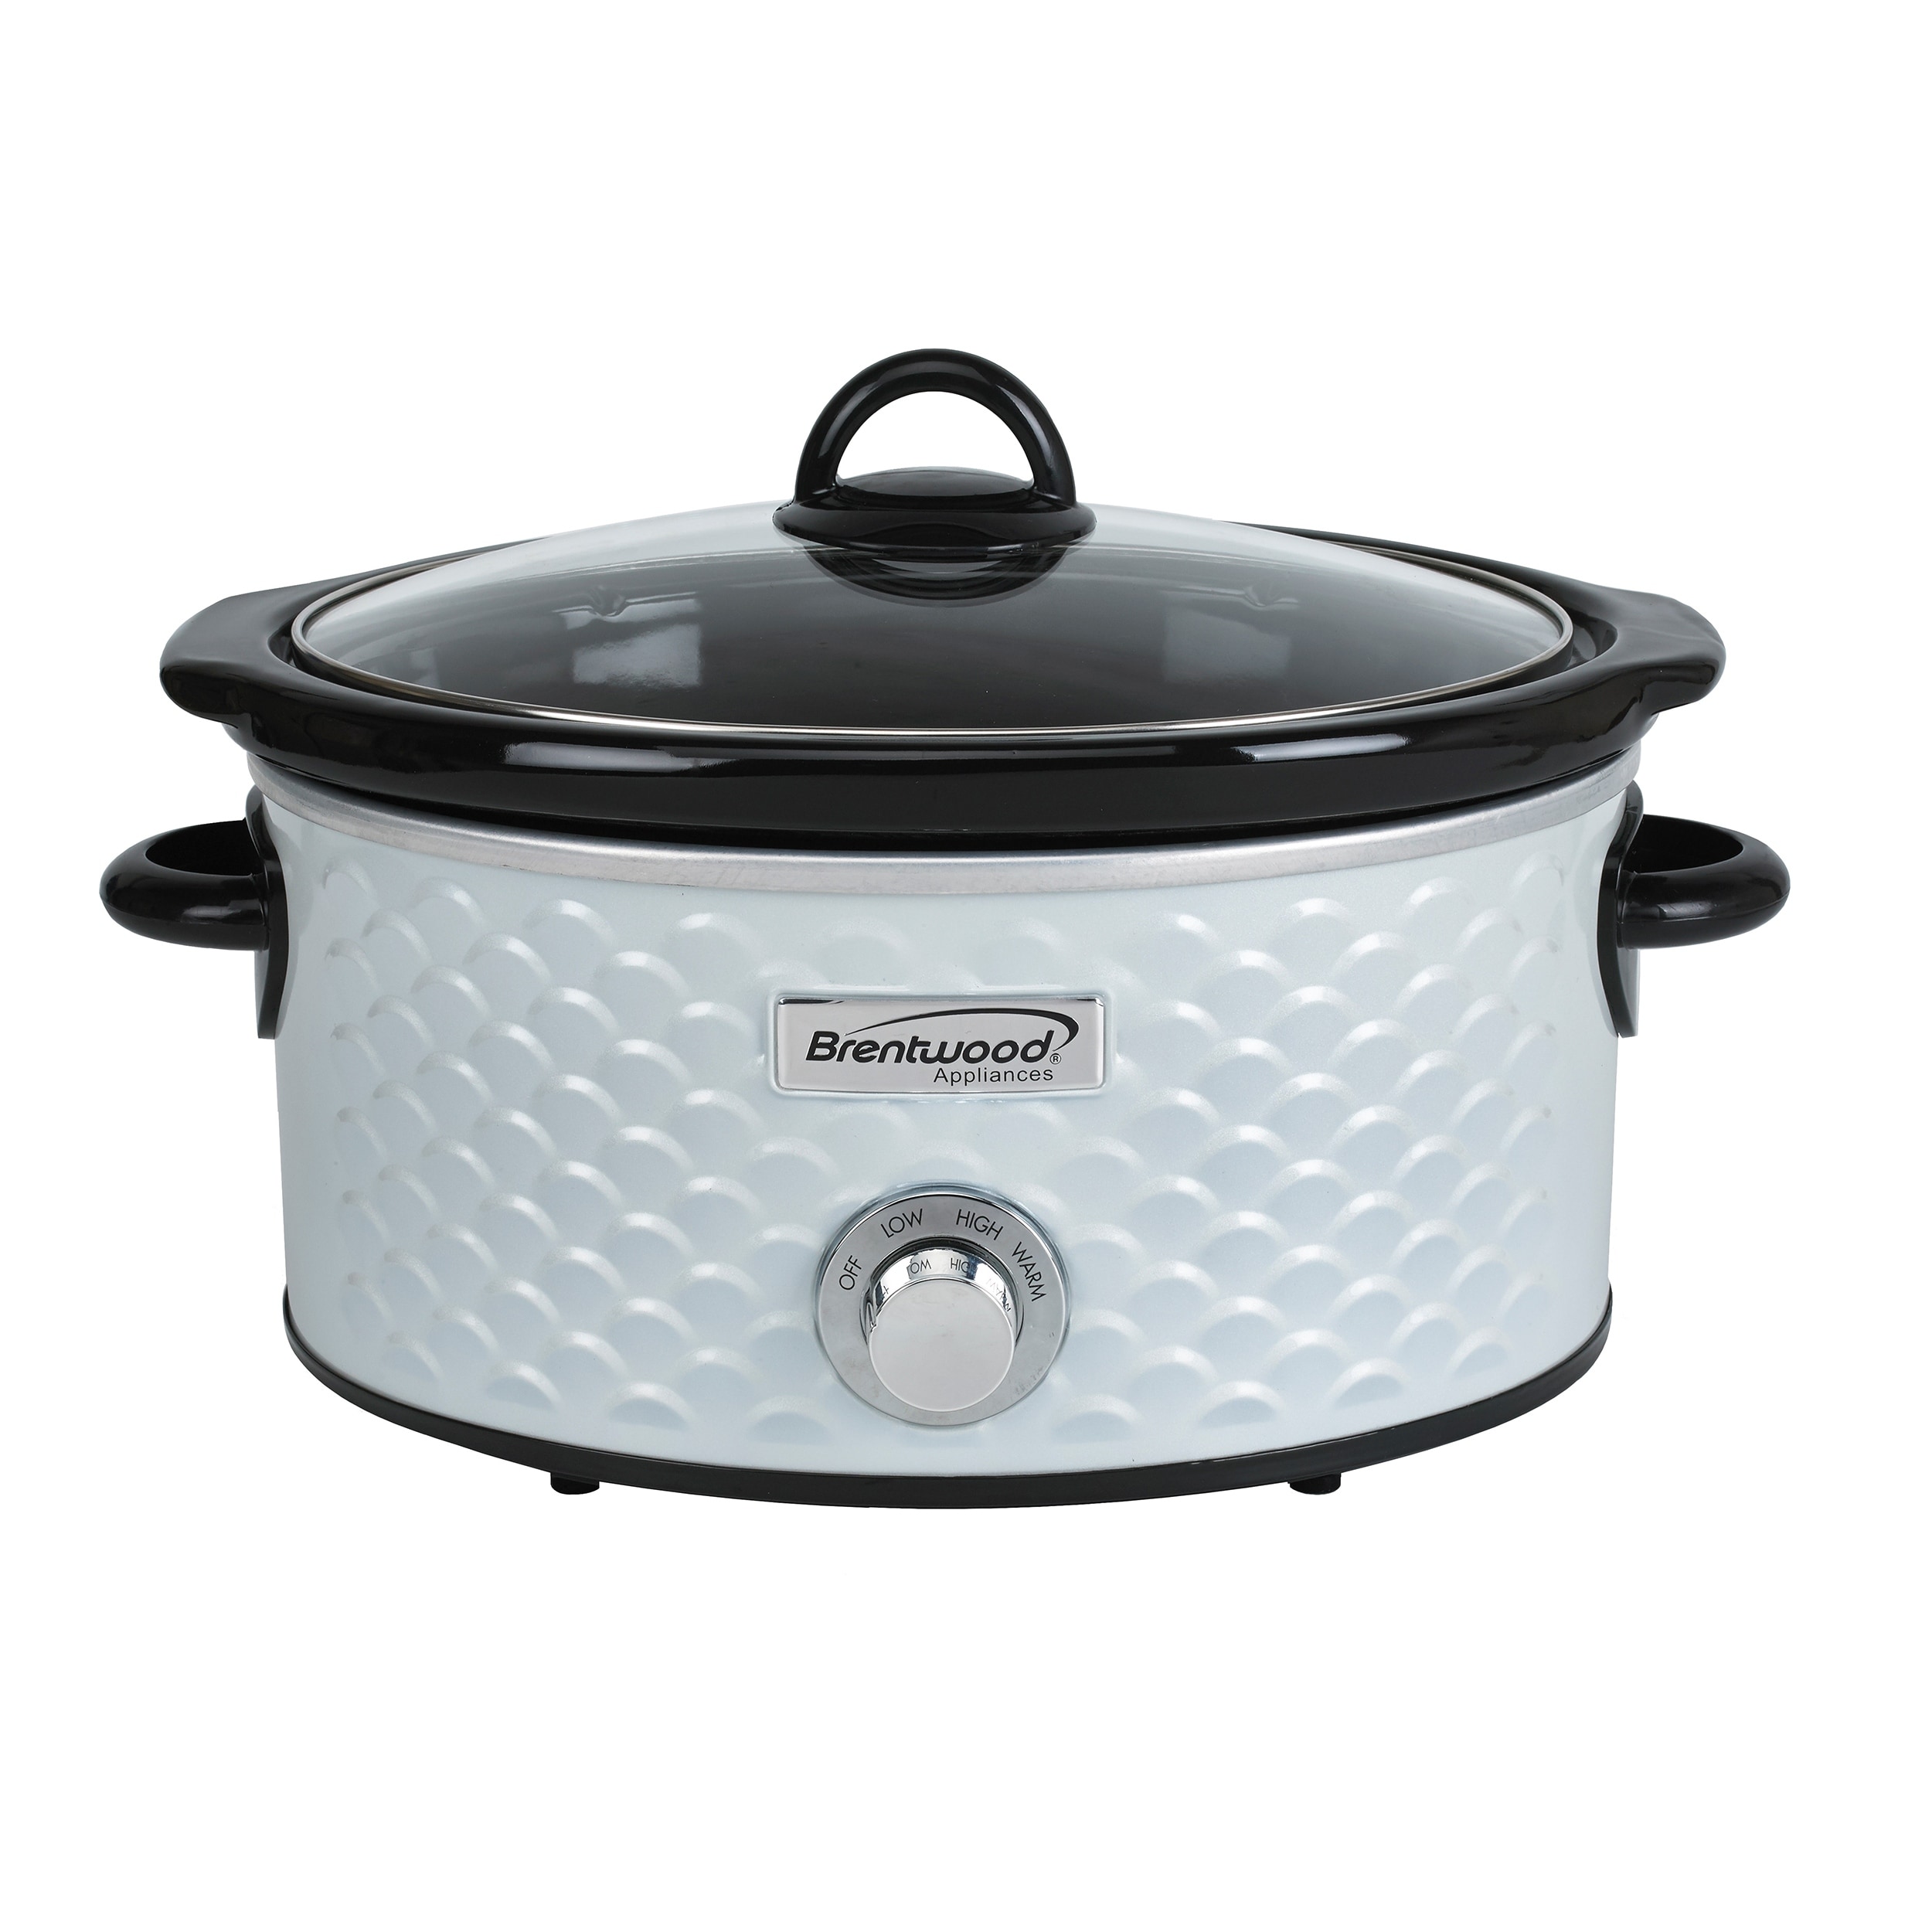 https://ak1.ostkcdn.com/images/products/is/images/direct/bdbd82db1fb8c7b57bab50e2a47163a6ac981b60/Brentwood-Scallop-Pattern-4.5-Quart-Slow-Cooker-in-White.jpg